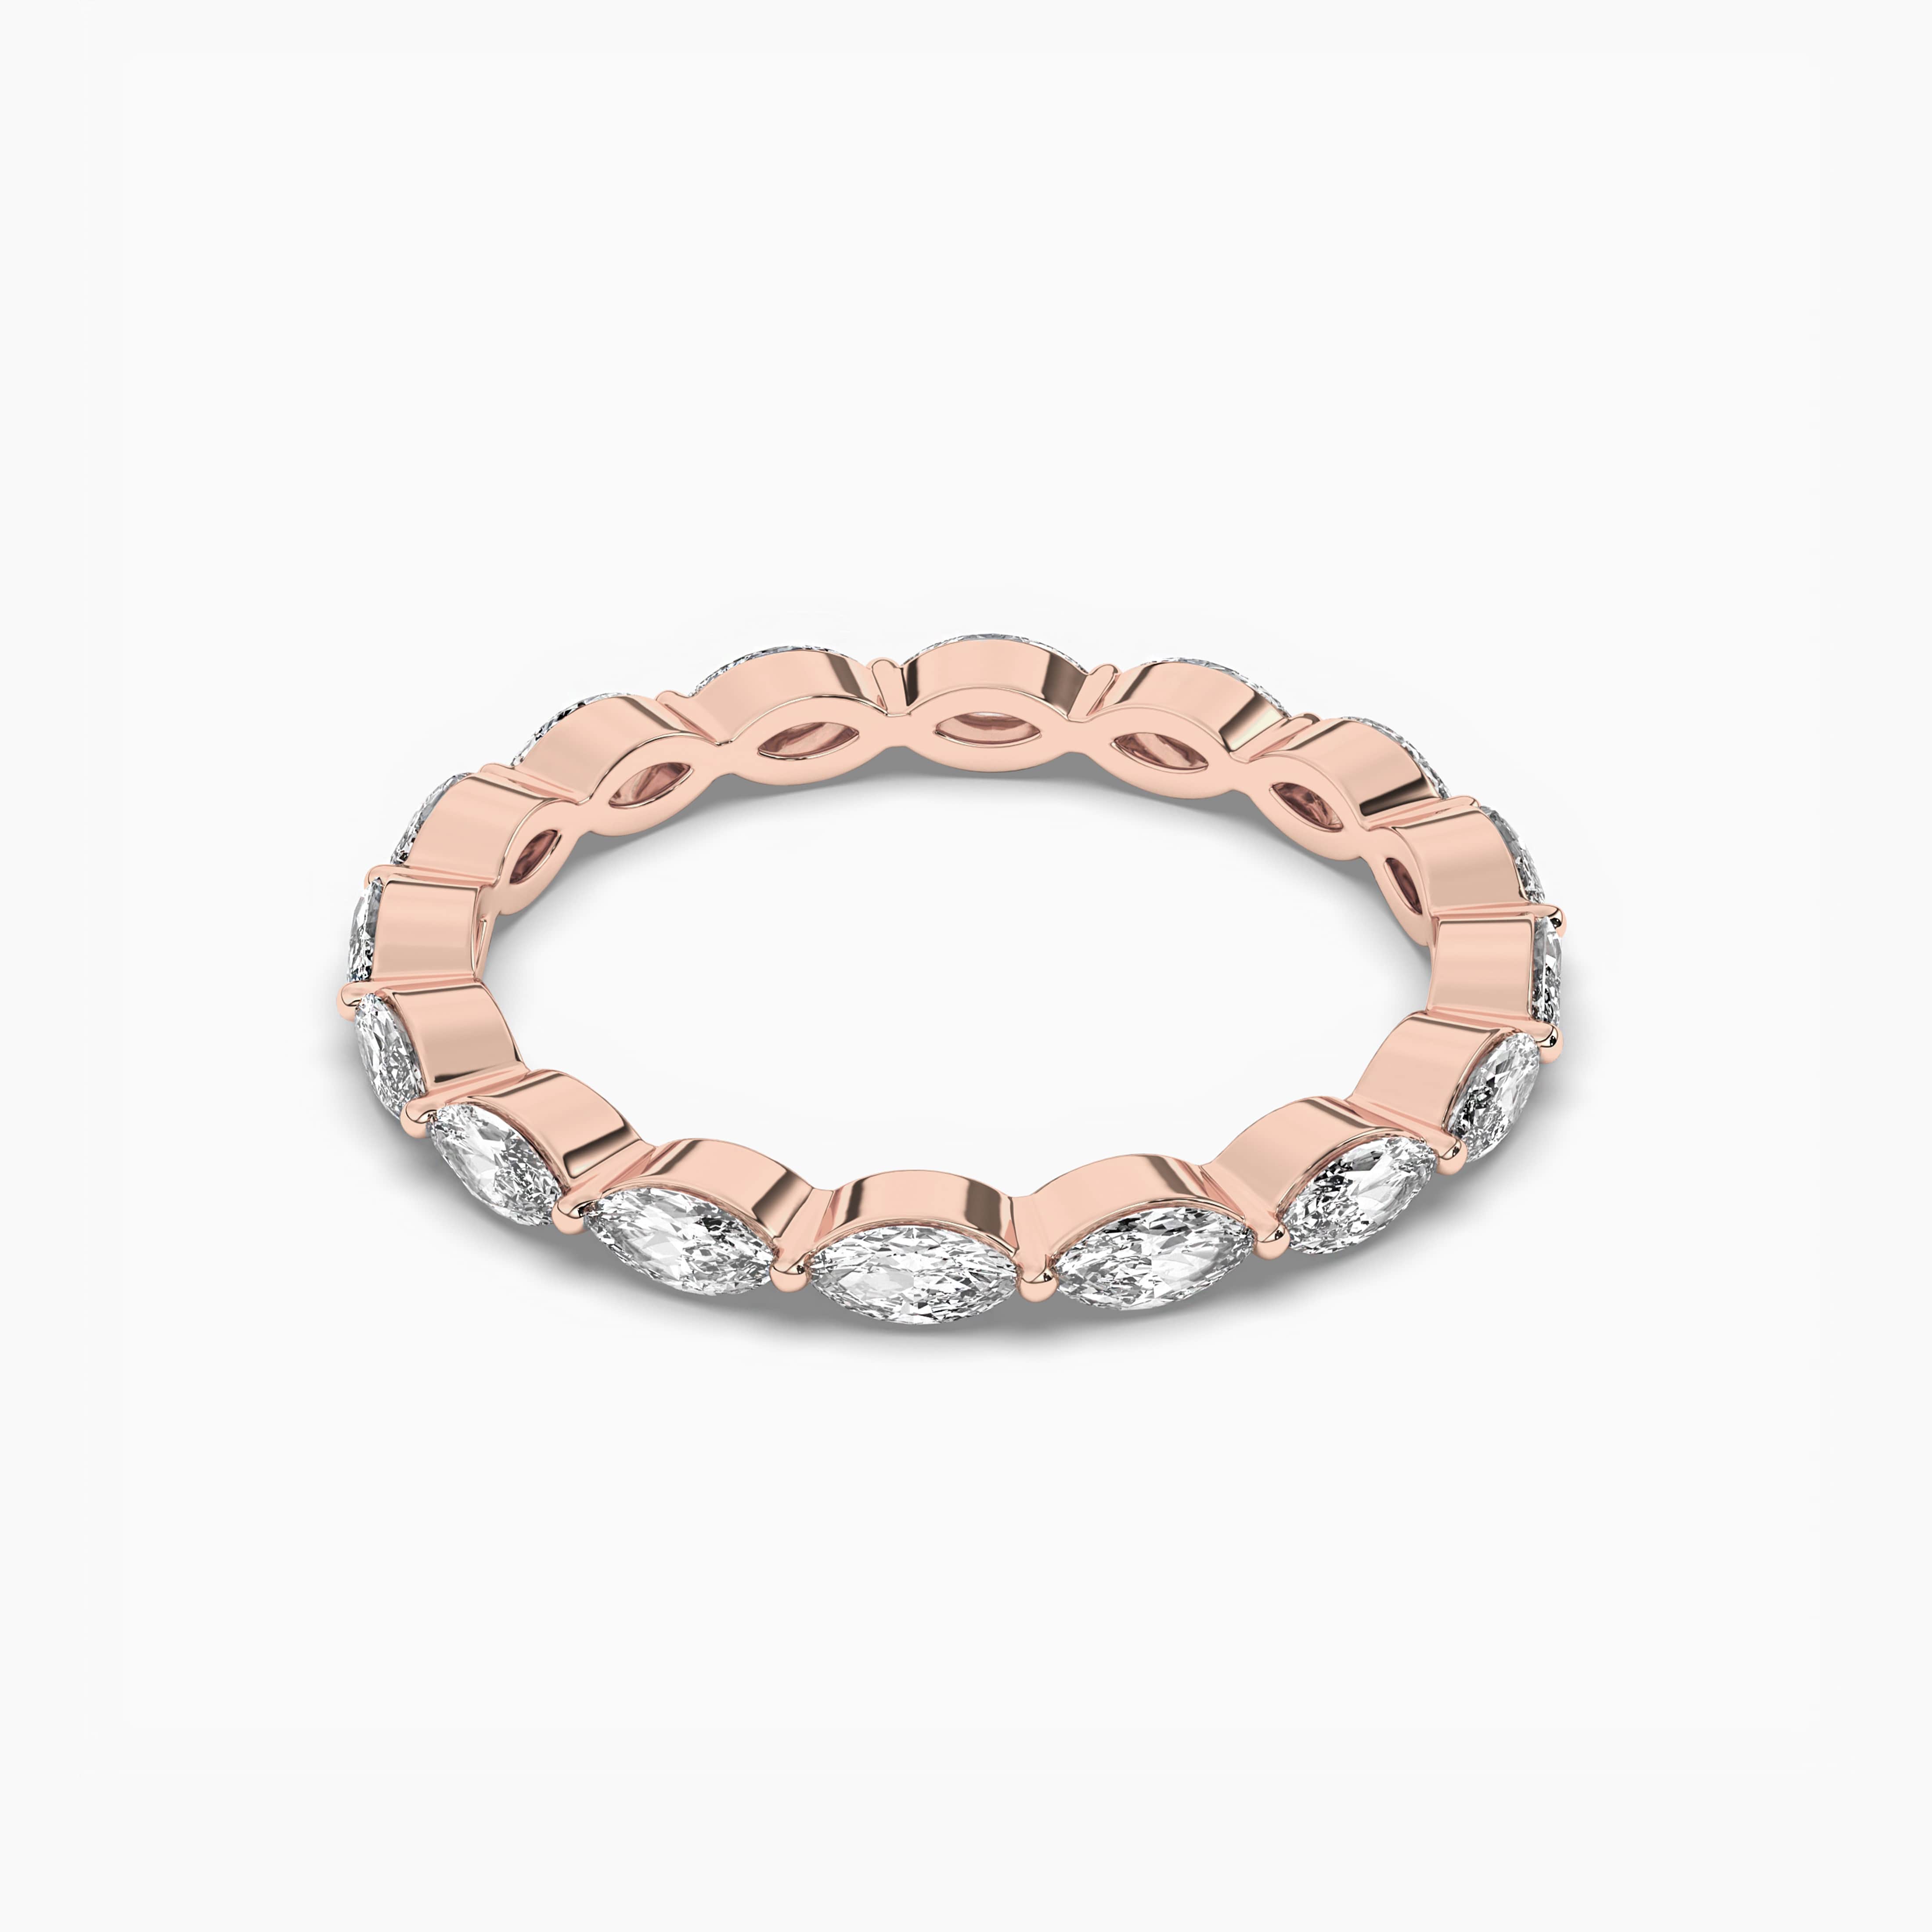 EAST WEST MARQUISE DIAMOND ETERNITY BAND RING IN ROSE GOLD FOR WOMAN